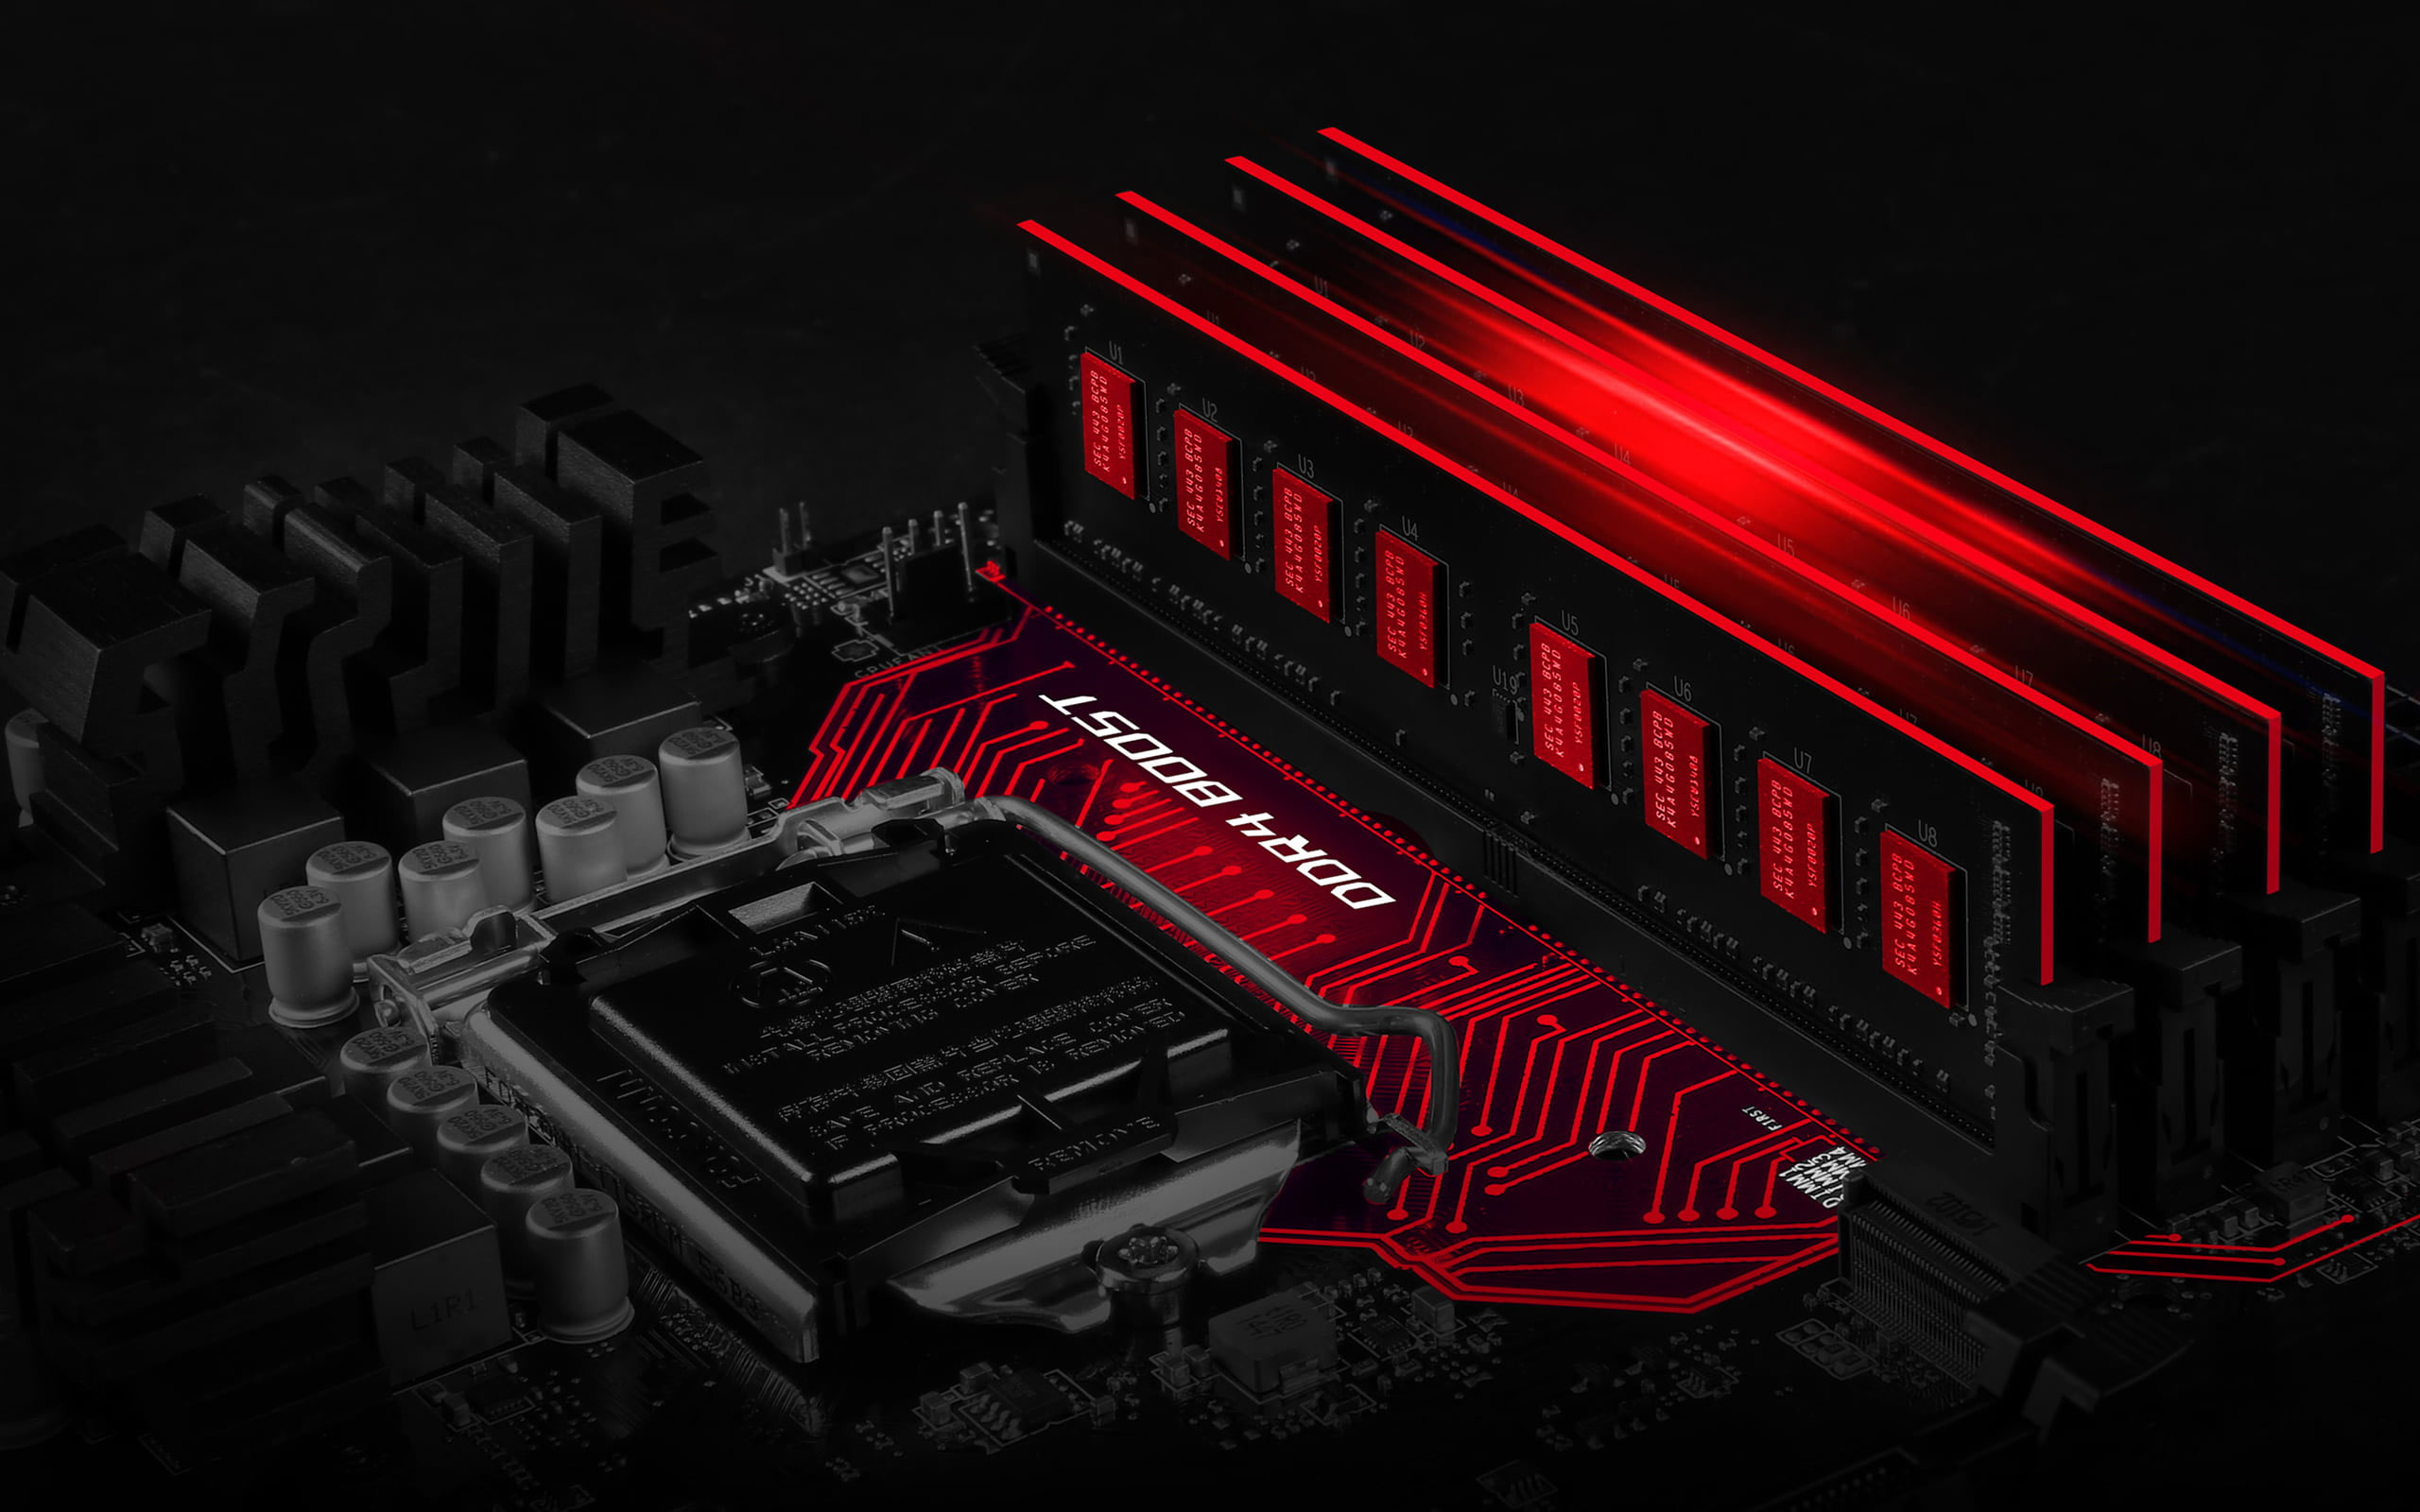 Black and red motherboard wallpaper, PC gaming, motherboards, MSI